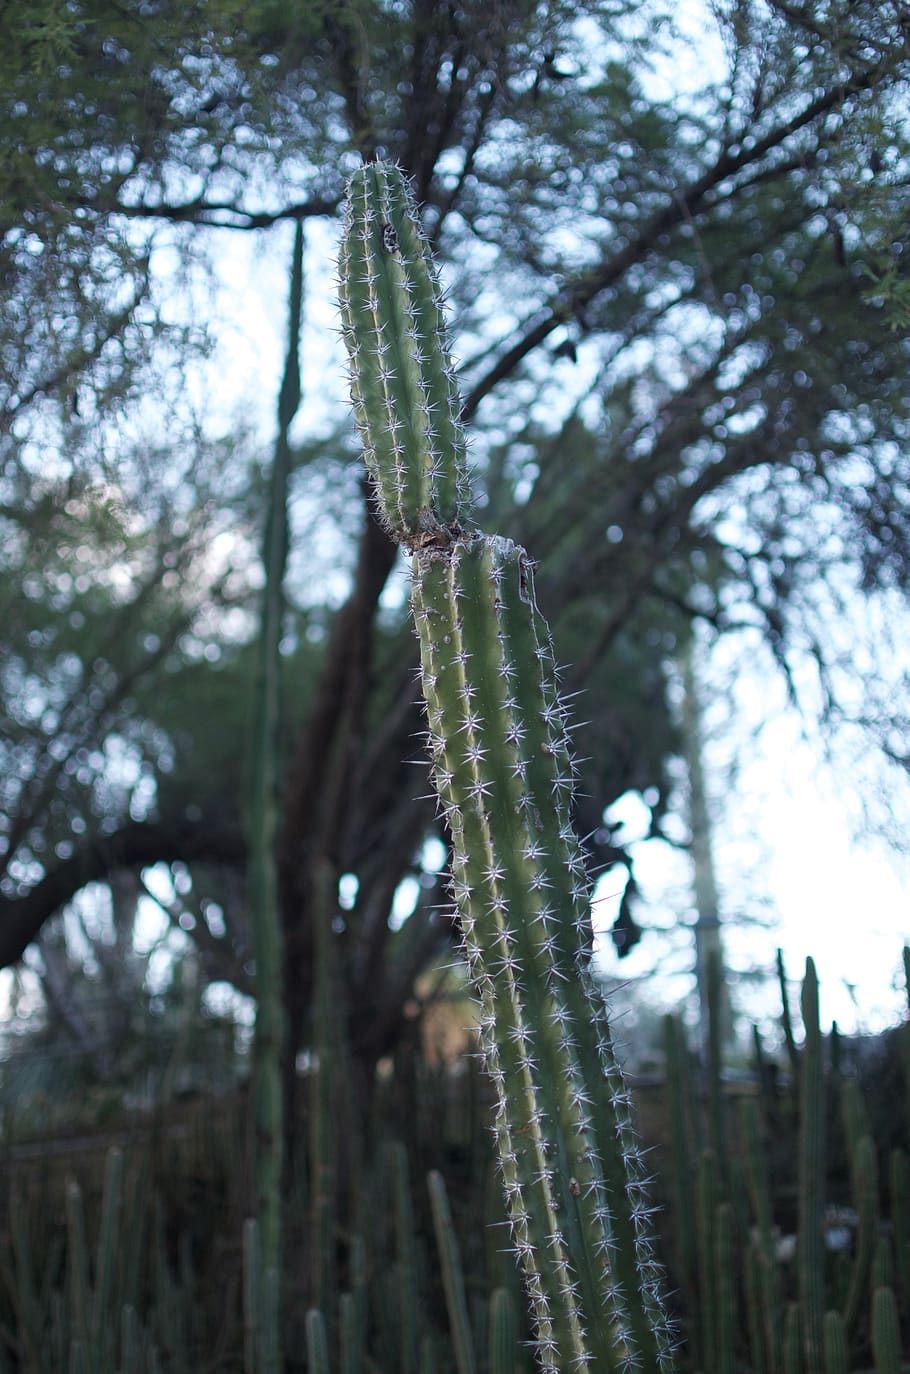 cactus, nature, green, trees, desert, plant, growth, beauty in nature